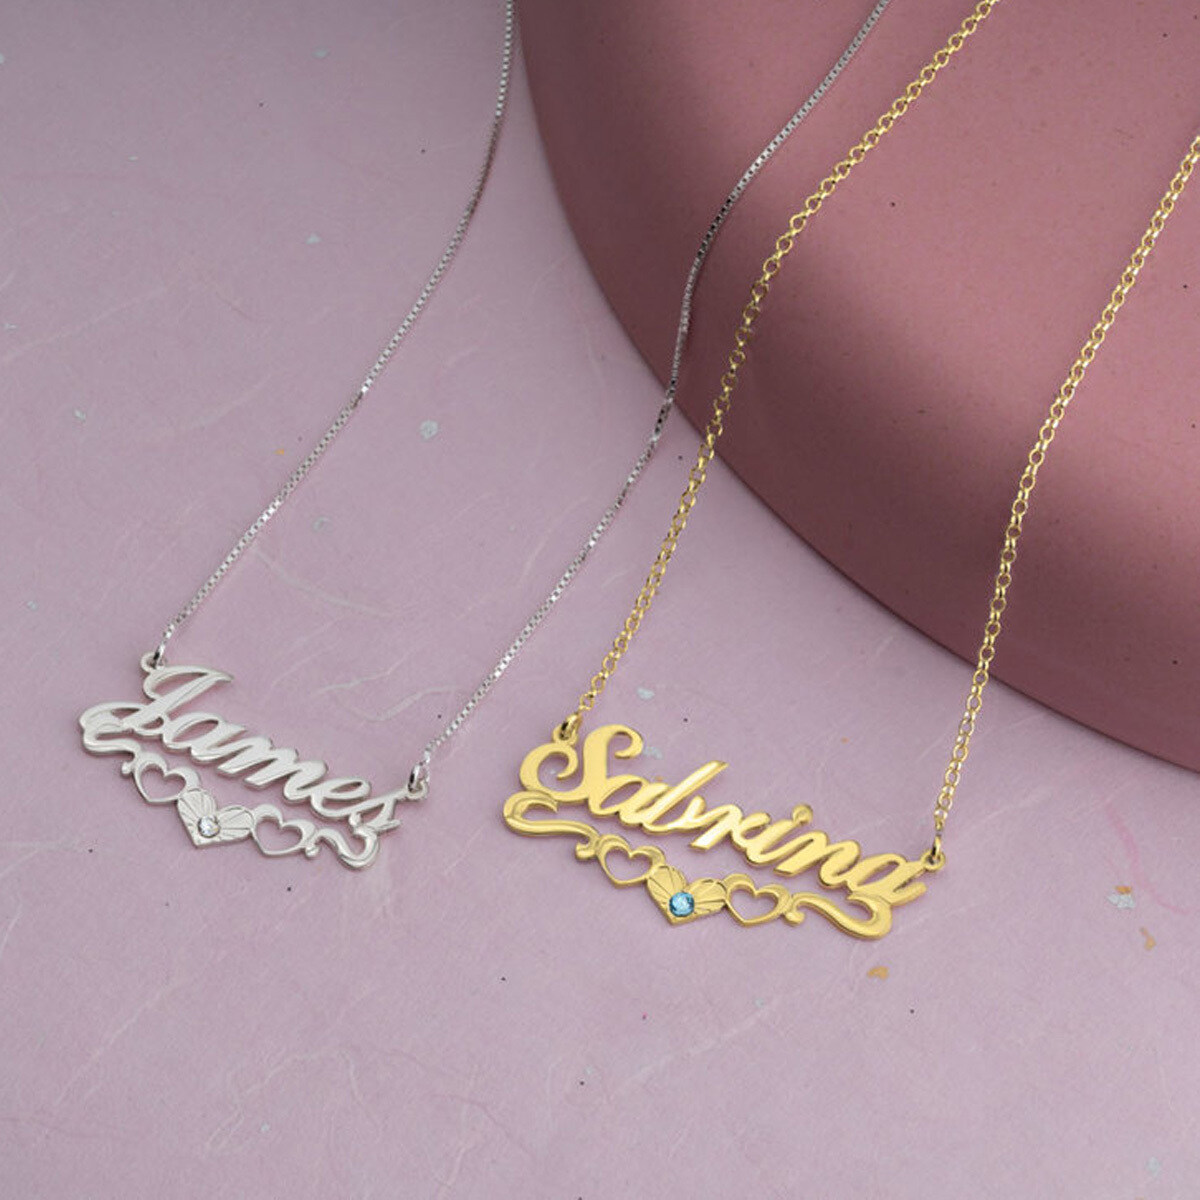 Personalized Engraved Classic Name Necklace Heart Gold Plated With Birthstone-6